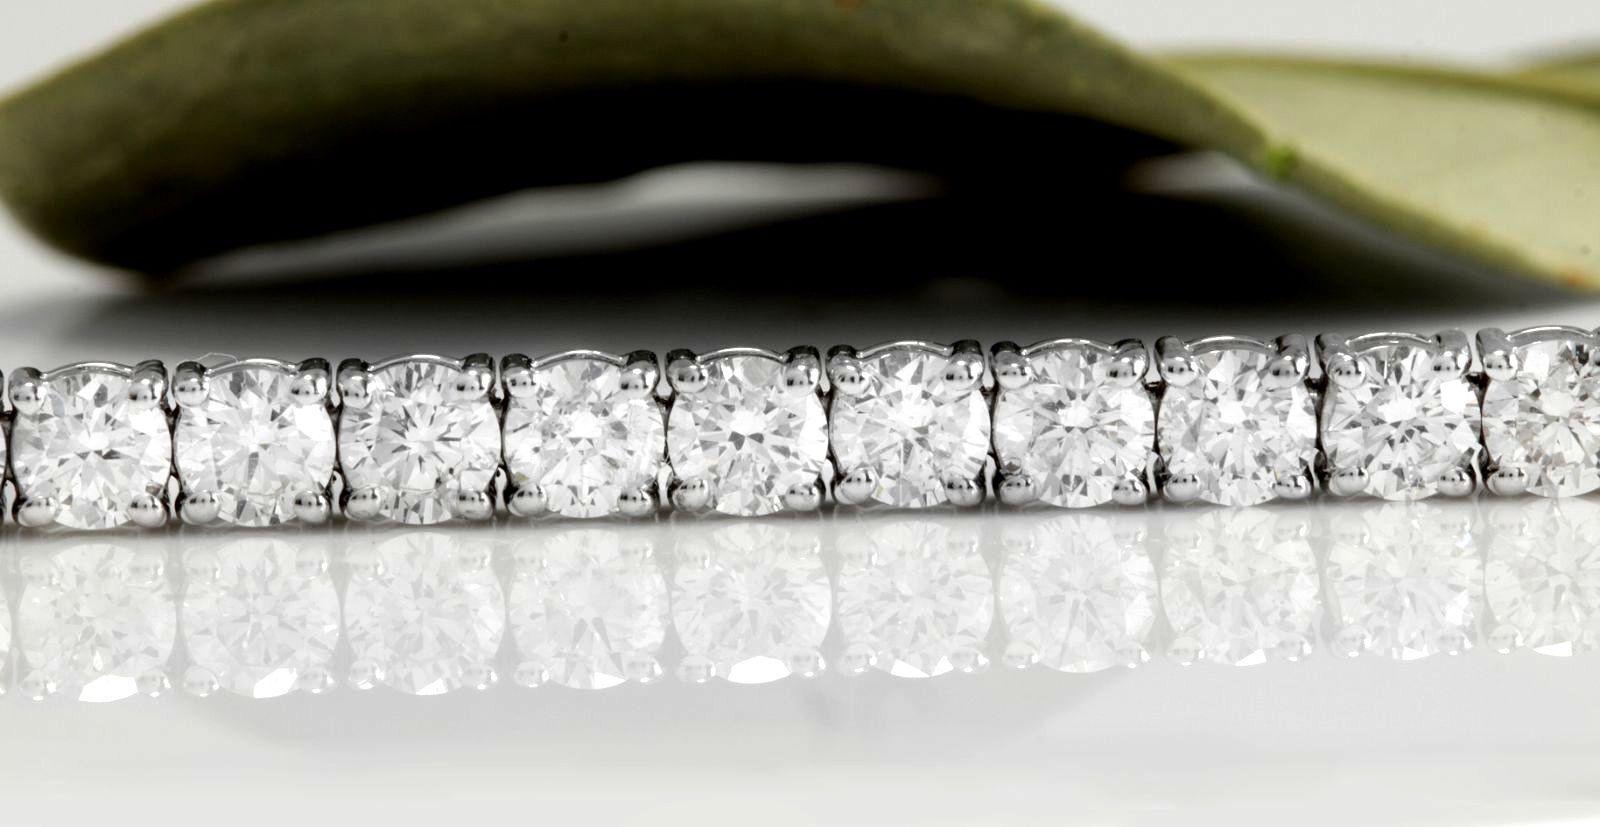 Very Impressive 3.75 Carats Natural VS Diamond 14K Solid White Gold Bracelet

STAMPED: 14K

Total Natural Round Diamonds Weight: 3.75 Carats (color H / Clarity VS1-VS2)

Bracelet Length is: 7 inches

Width: 2.7mm

Bracelet total weight: